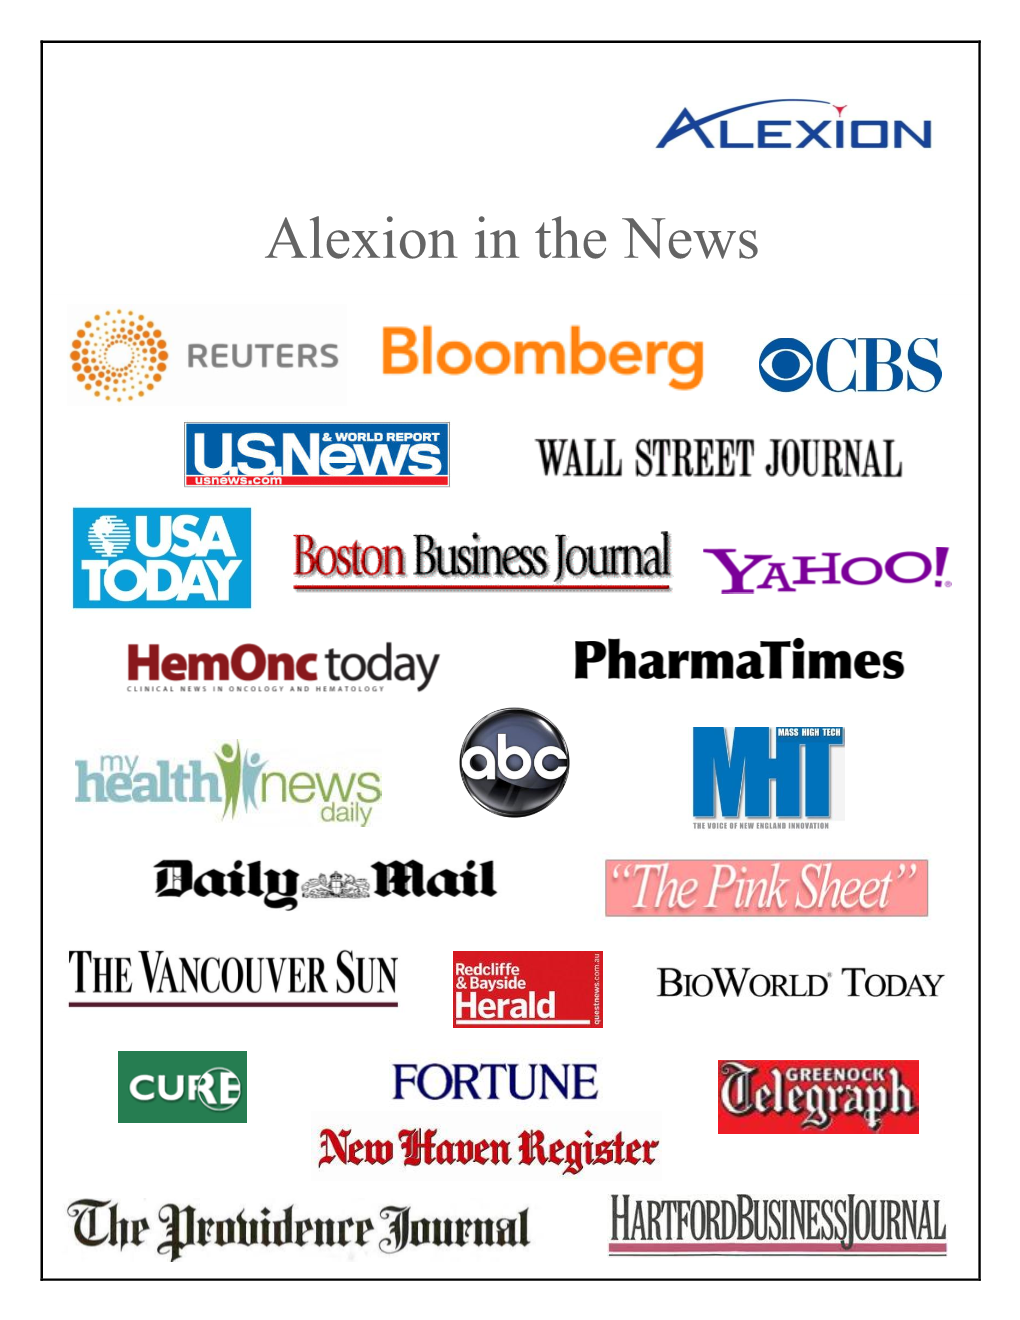 Alexion in the News